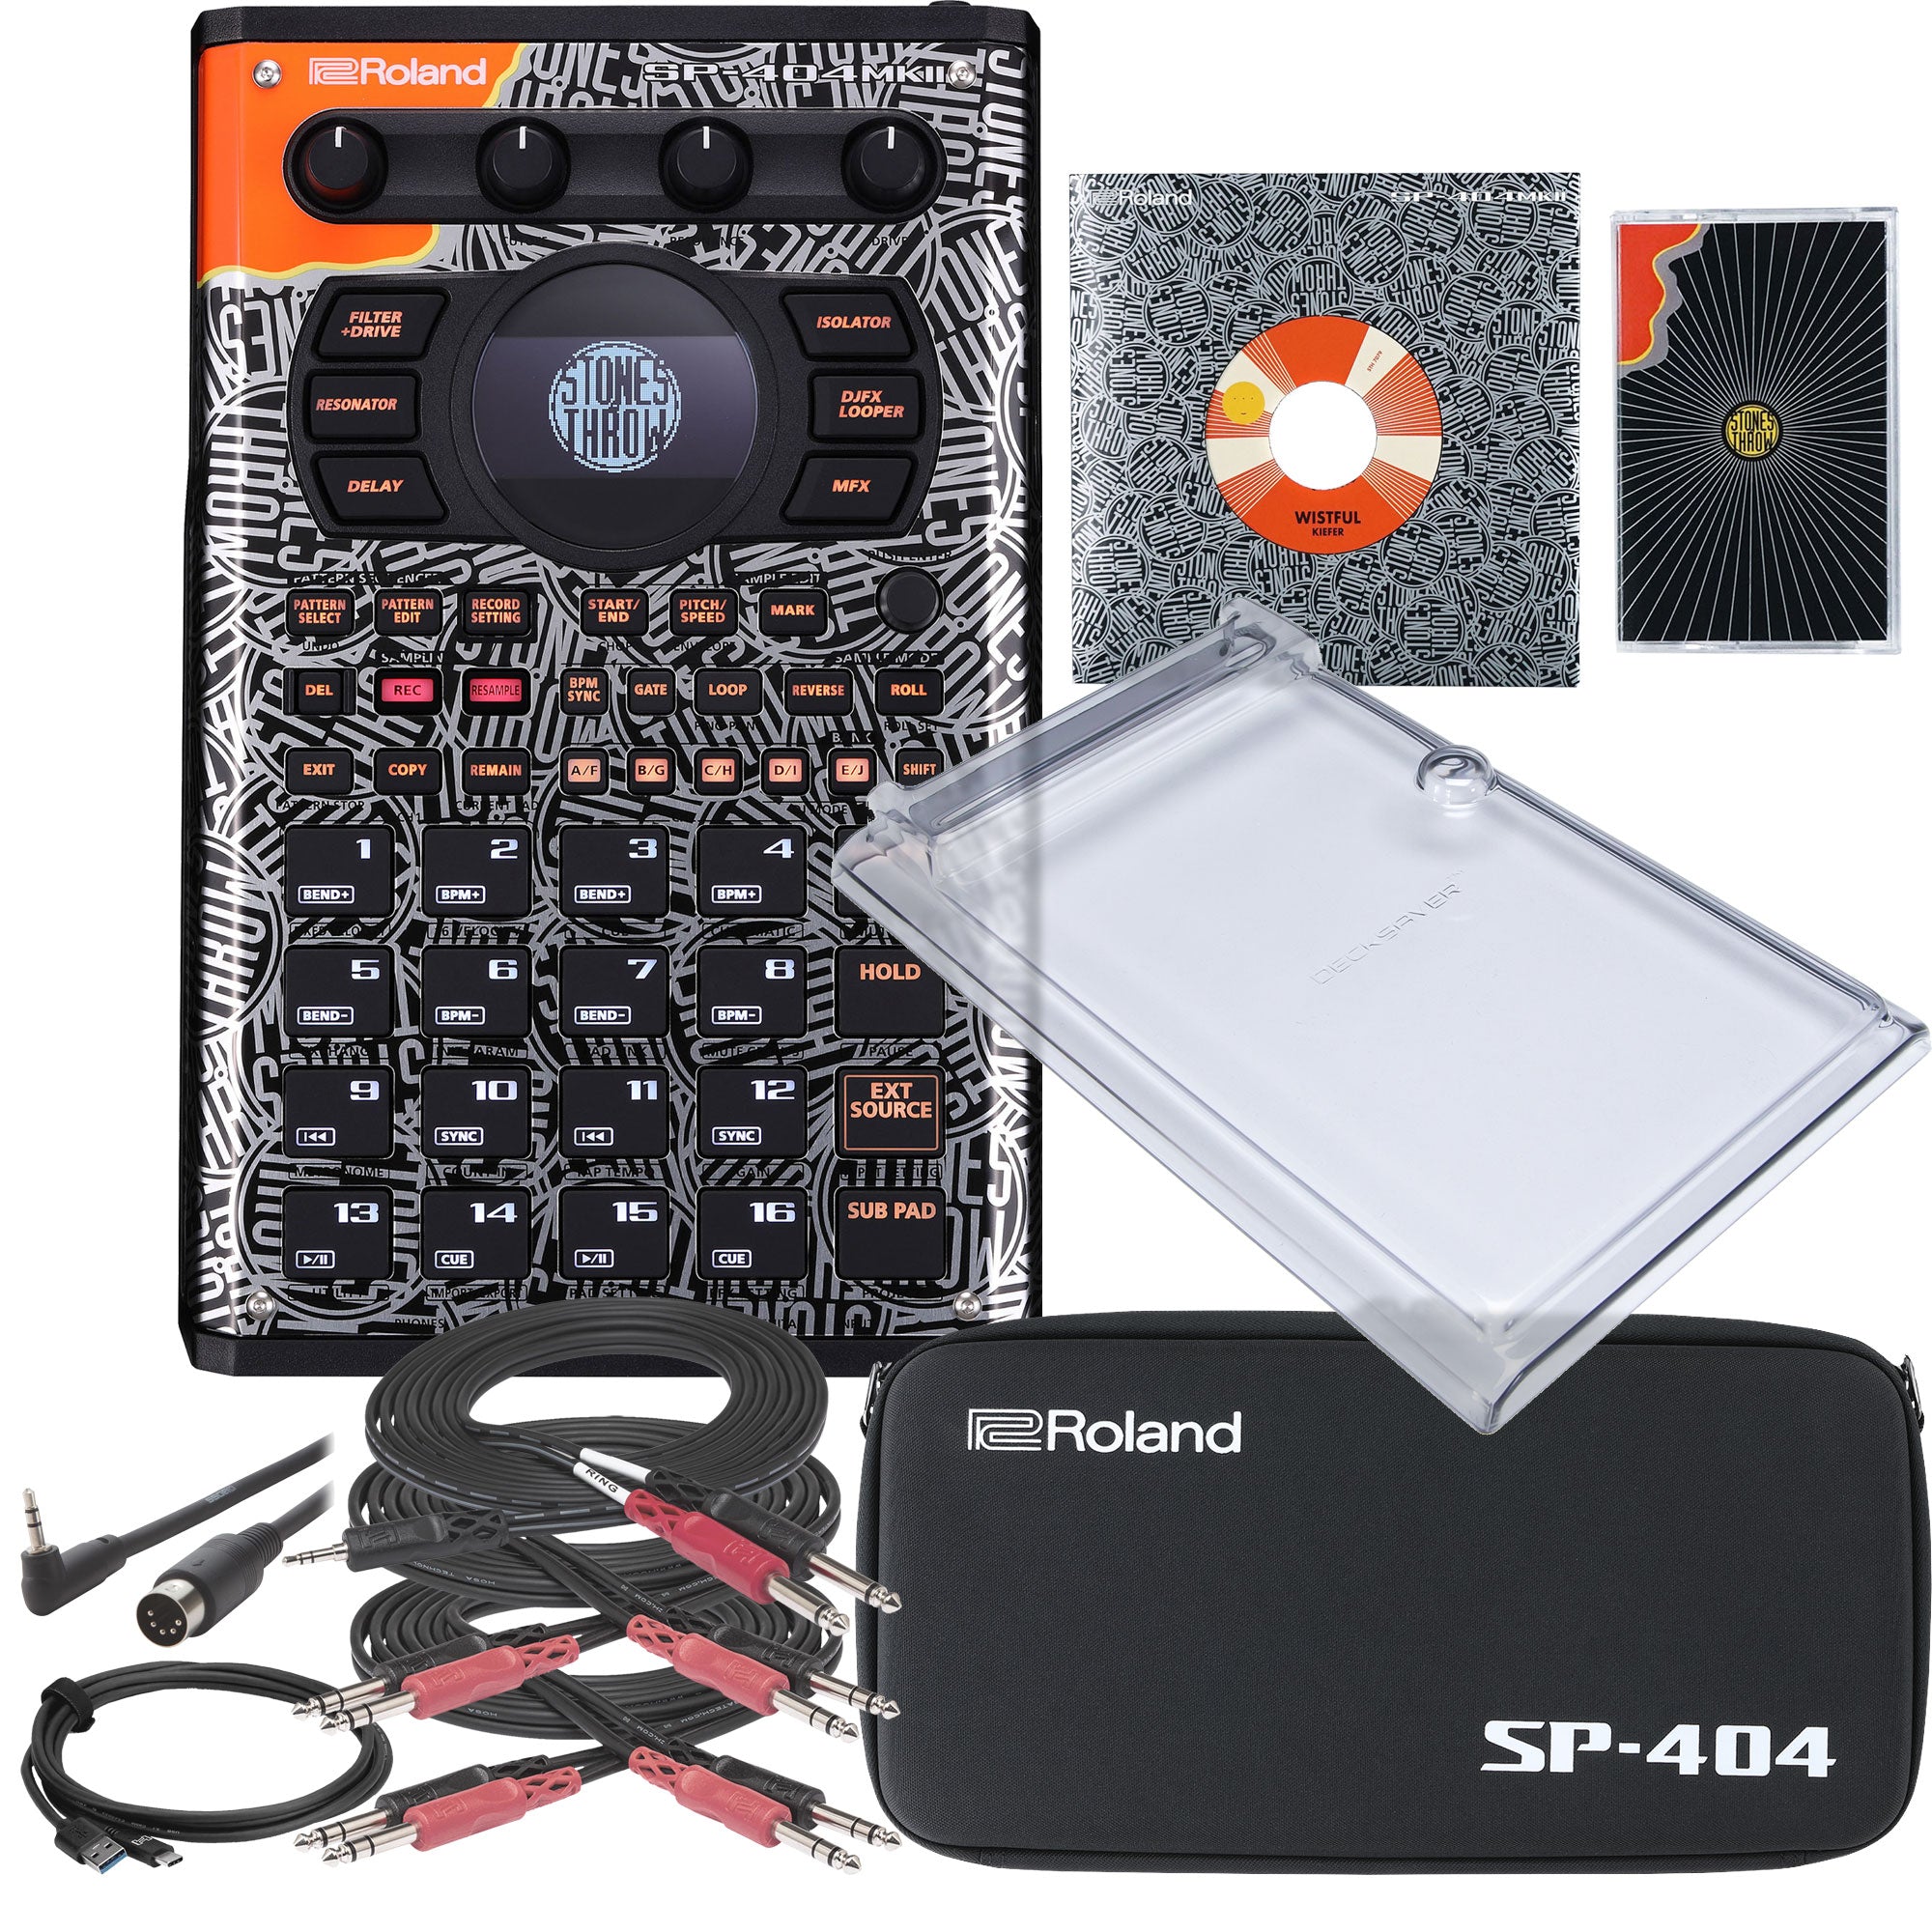 Roland SP-404MKII Stones Throw Limited Edition ULTRA BUNDLE